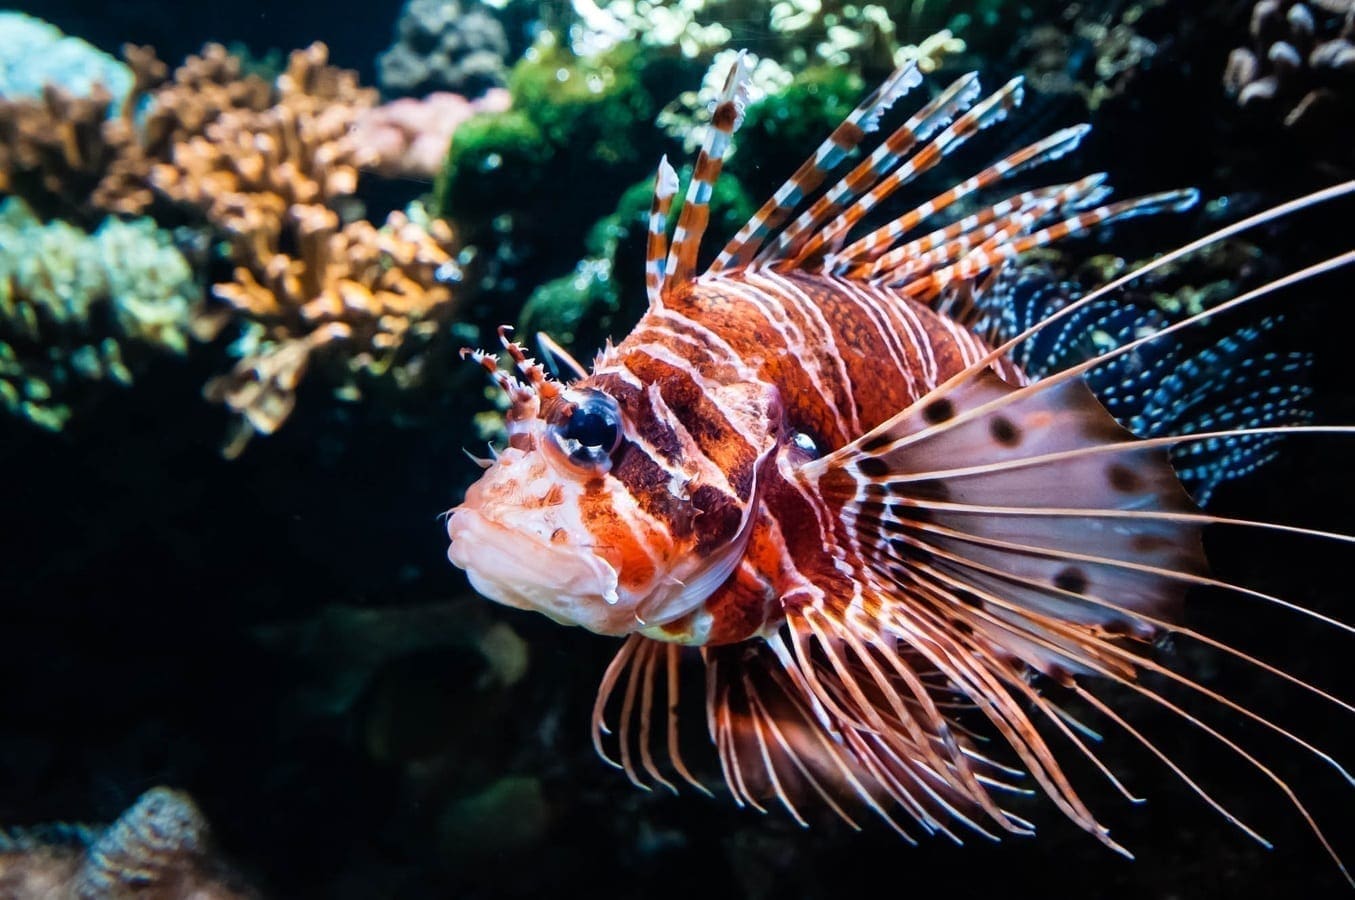 Lionfish in a reef, photo credit: pxhere